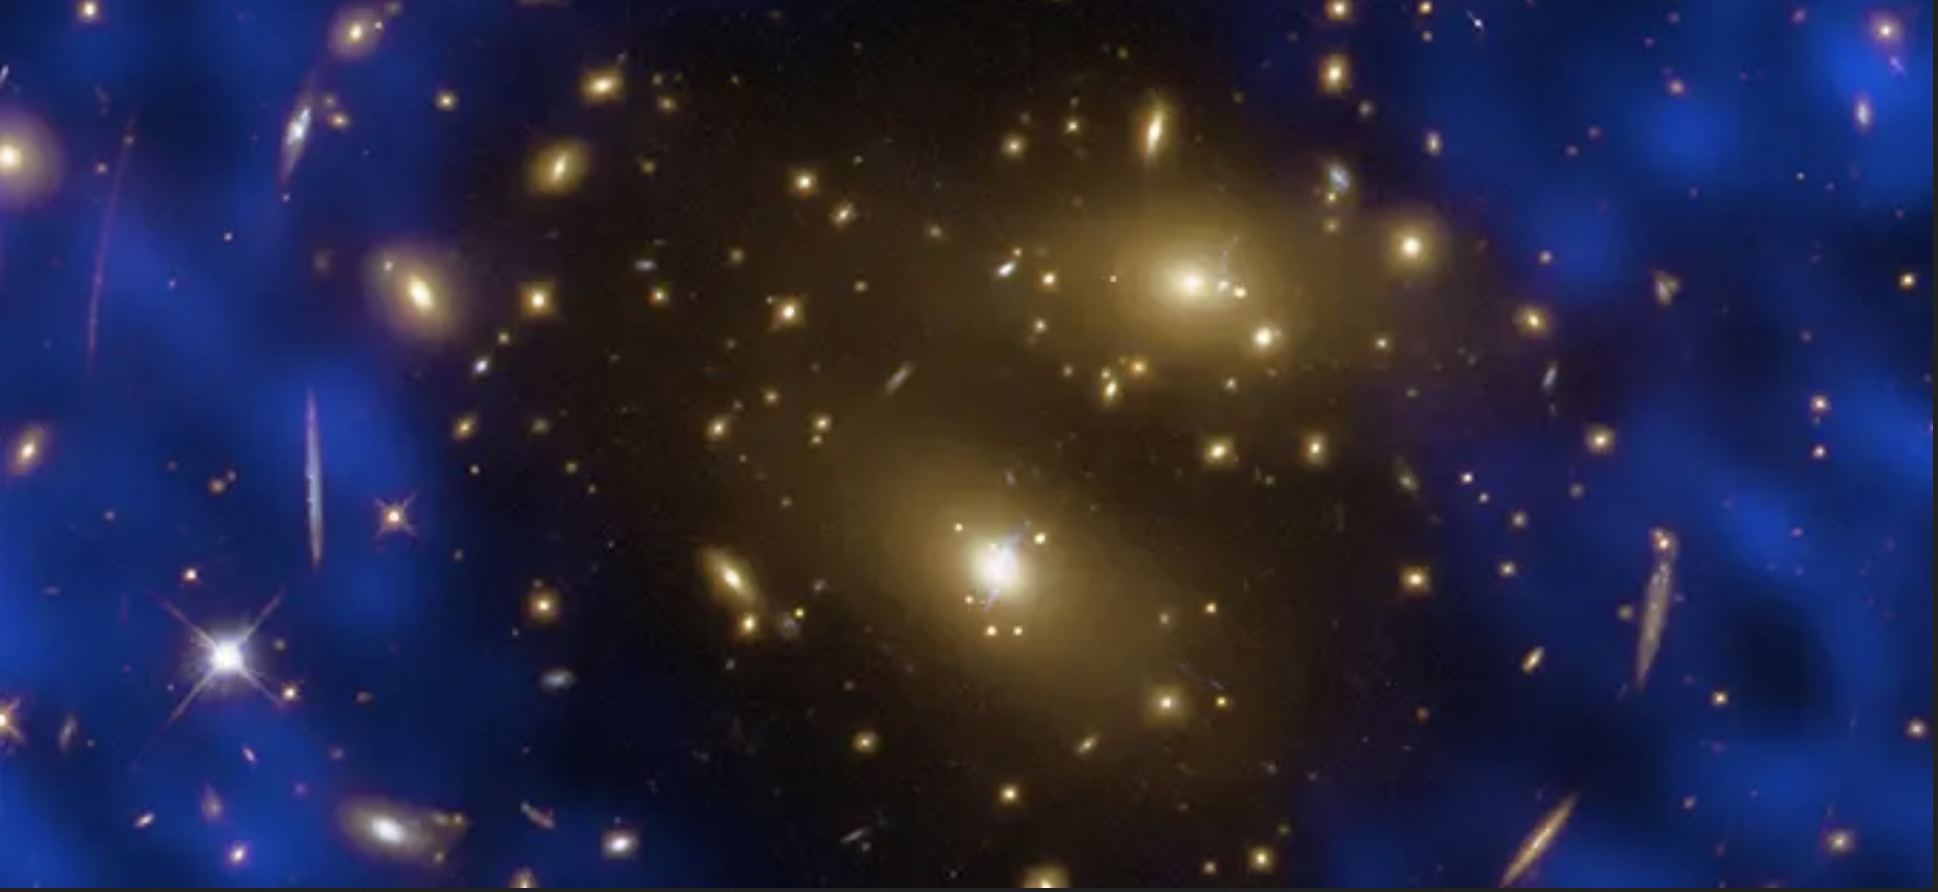 ‘Hole in the ALMA sky’ is produced by hot cluster gas